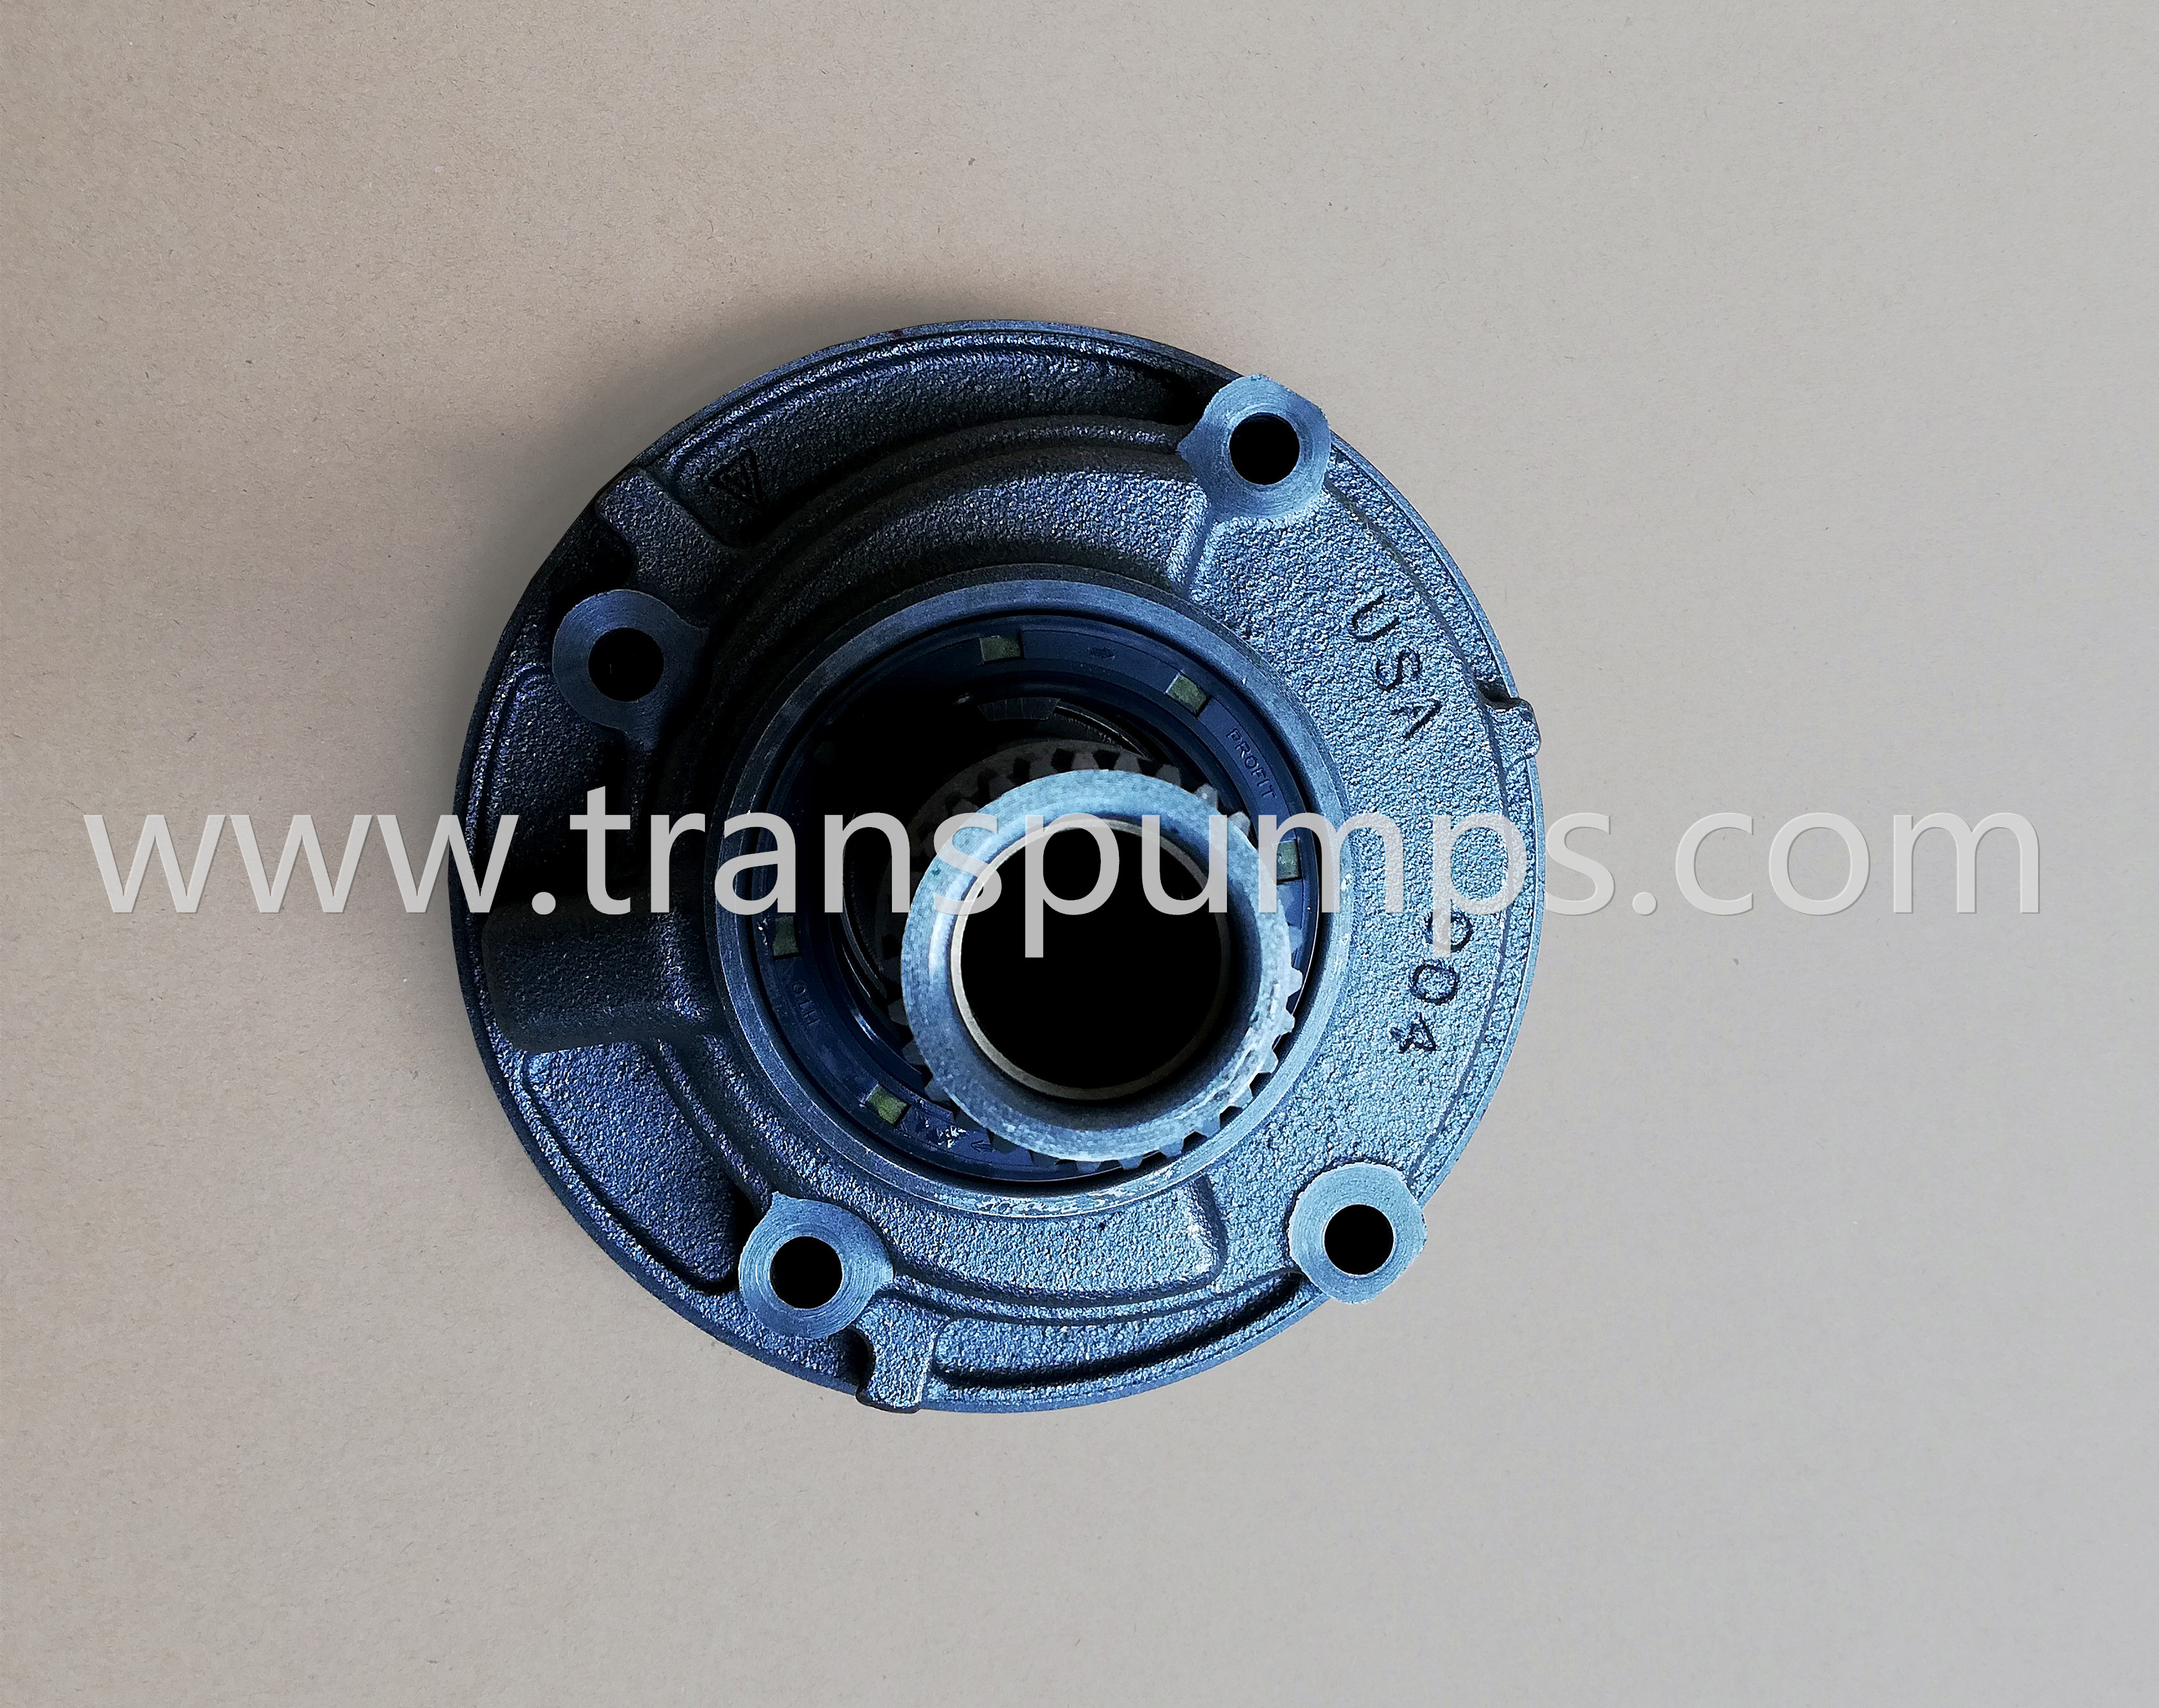 Case torque charge pump, transmission charge pump for CASE machine, transmission pump for case, transmission oil gear pump, New aftermarket transmission charge oil pump assembly, transmission pump CASE machines, US OEM transmission pump CASE machines, shuttle transmission charge pump, new aftermarket hydraulic pump, case backhoe hydraulic pump, case backhoe fuel pump,case 580 fuel pump, case hydraulic pump,case 580k lift pump, case 580 lift pump, case 580l lift pump,case lift pump, case pump price, case pumps,case pump 580k, case 685 hydraulic pump, case 580k transmission pump, case 580k transmission pump, case 580l transmission pump,case 580d transmission pump, case 580 super k transmission pump, case 580 super transmission pump.Backhoe pump, backhoe main pump,backhoe fuel pump, backhoe charge pump，pumpa hidraulike，CASE transmission charging pump for backhoe loader, part no: 137093A1